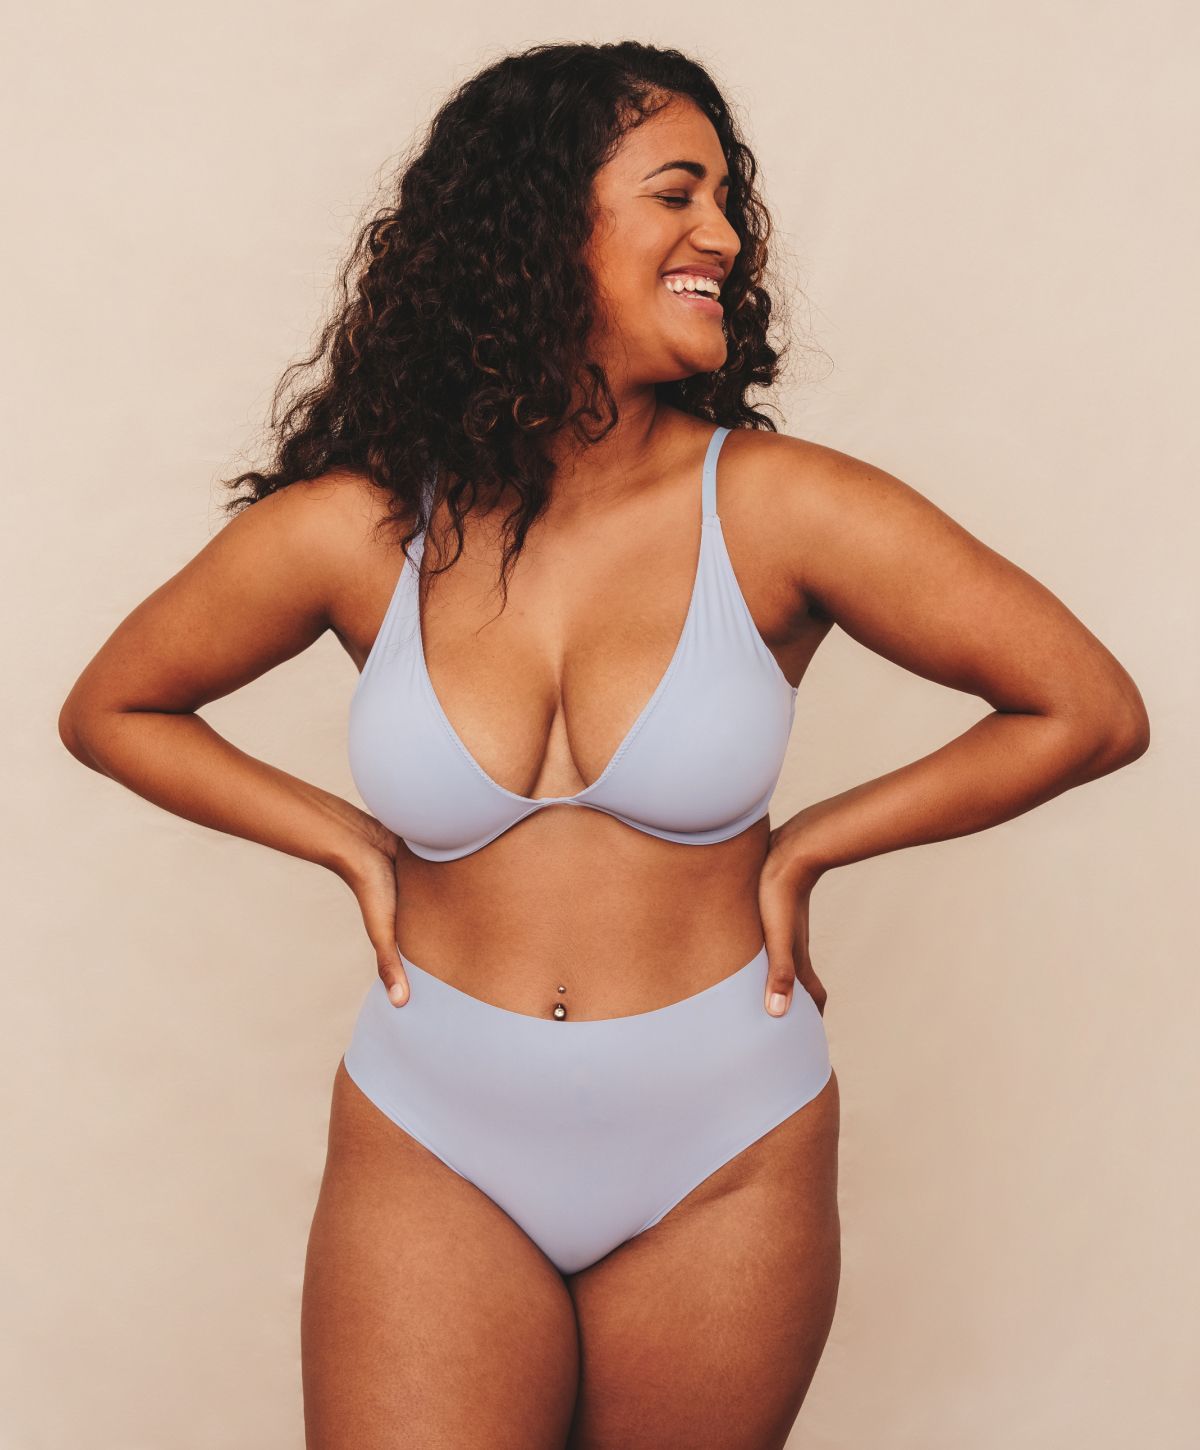 Franklin body contouring model with curly brown hair